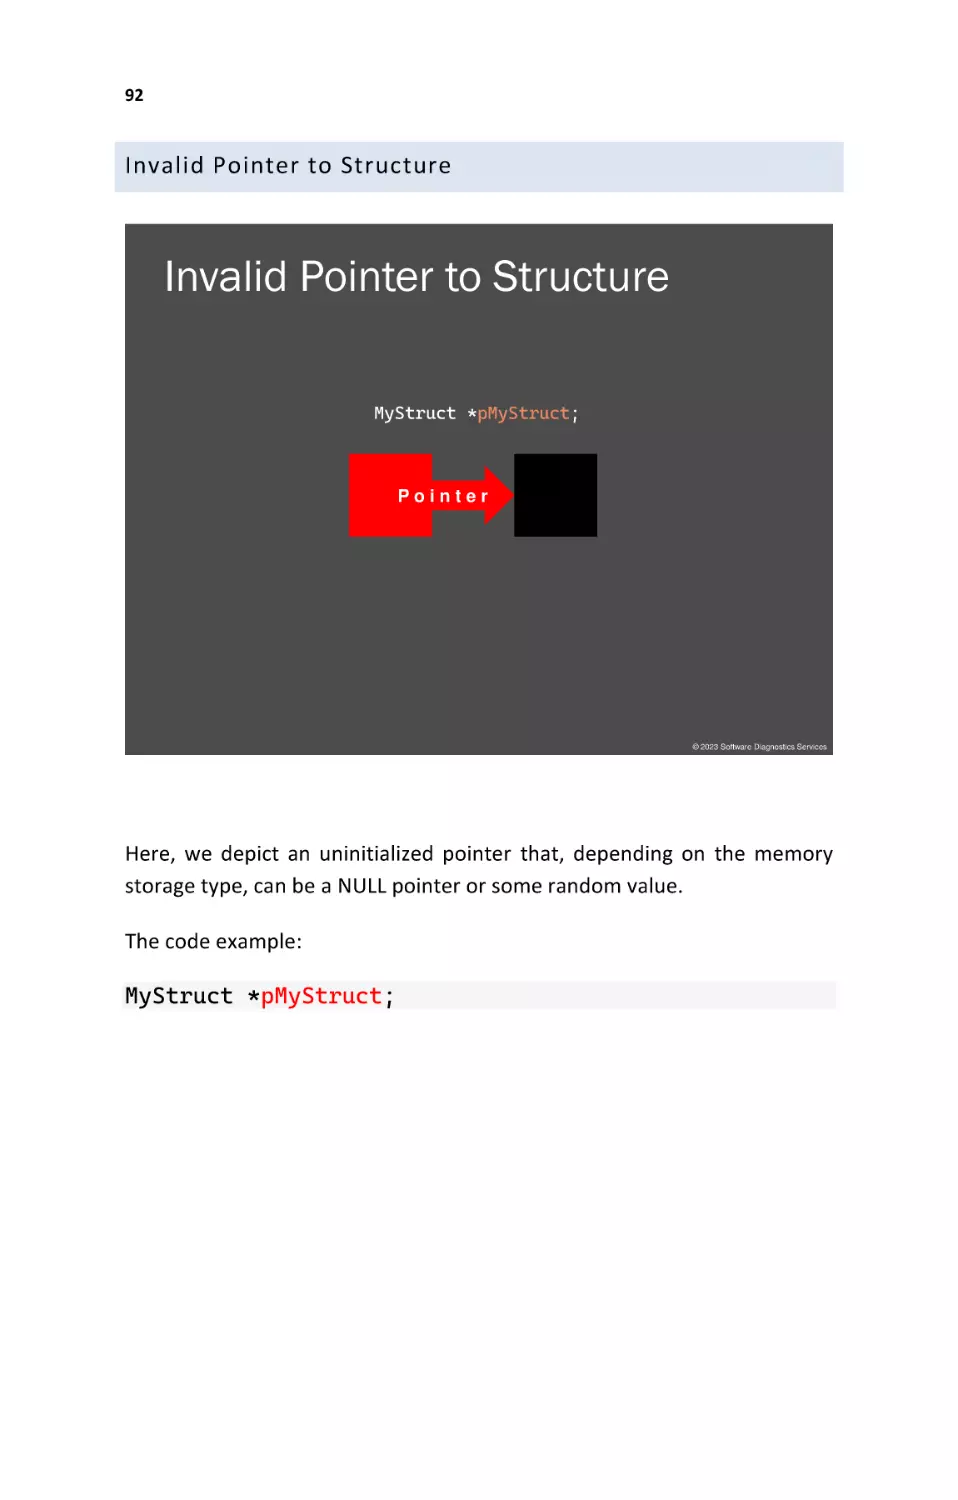 Invalid Pointer to Structure